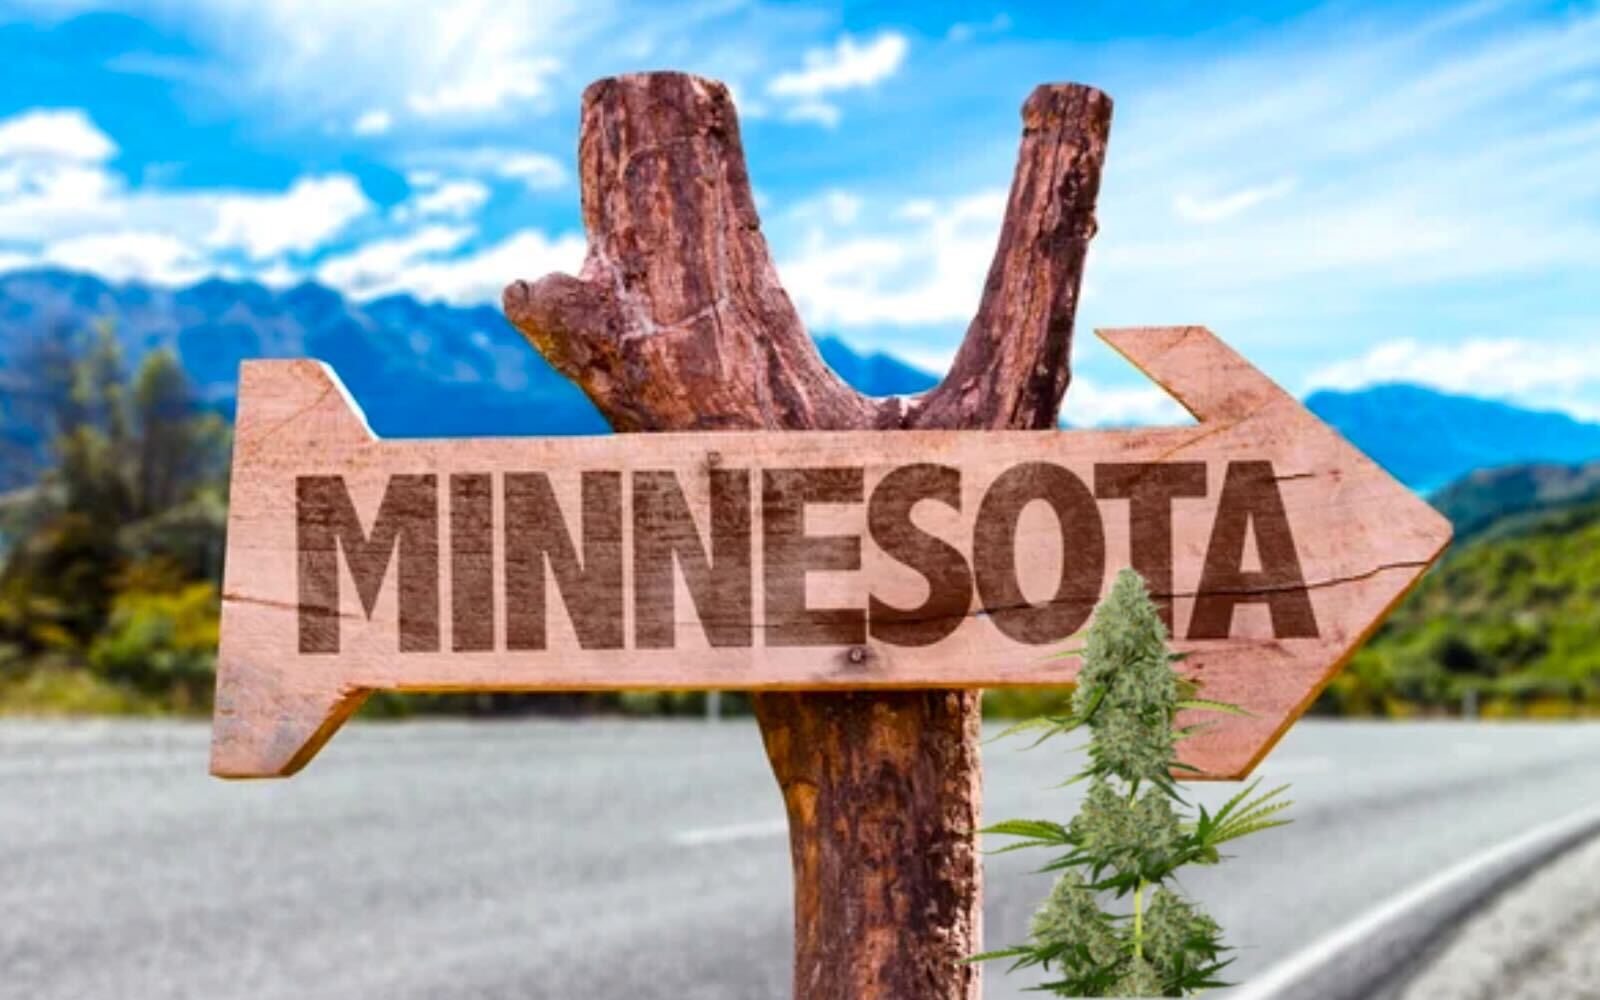 Minnesota approves sweeping recreational cannabis law